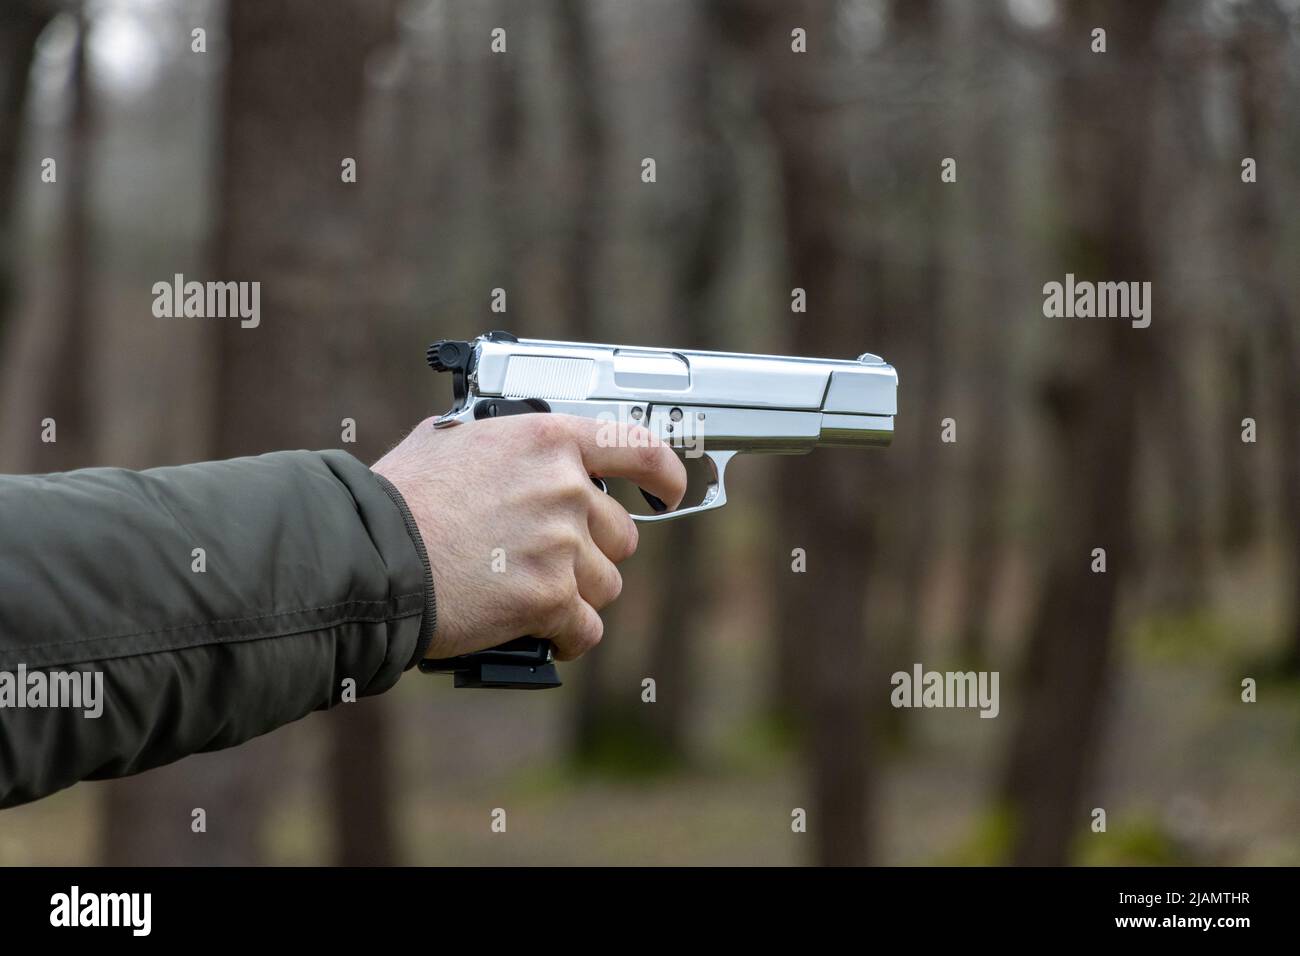 A man is holding a gun and aiming. A hand holding a gun about to shoot with a pistol Stock Photo